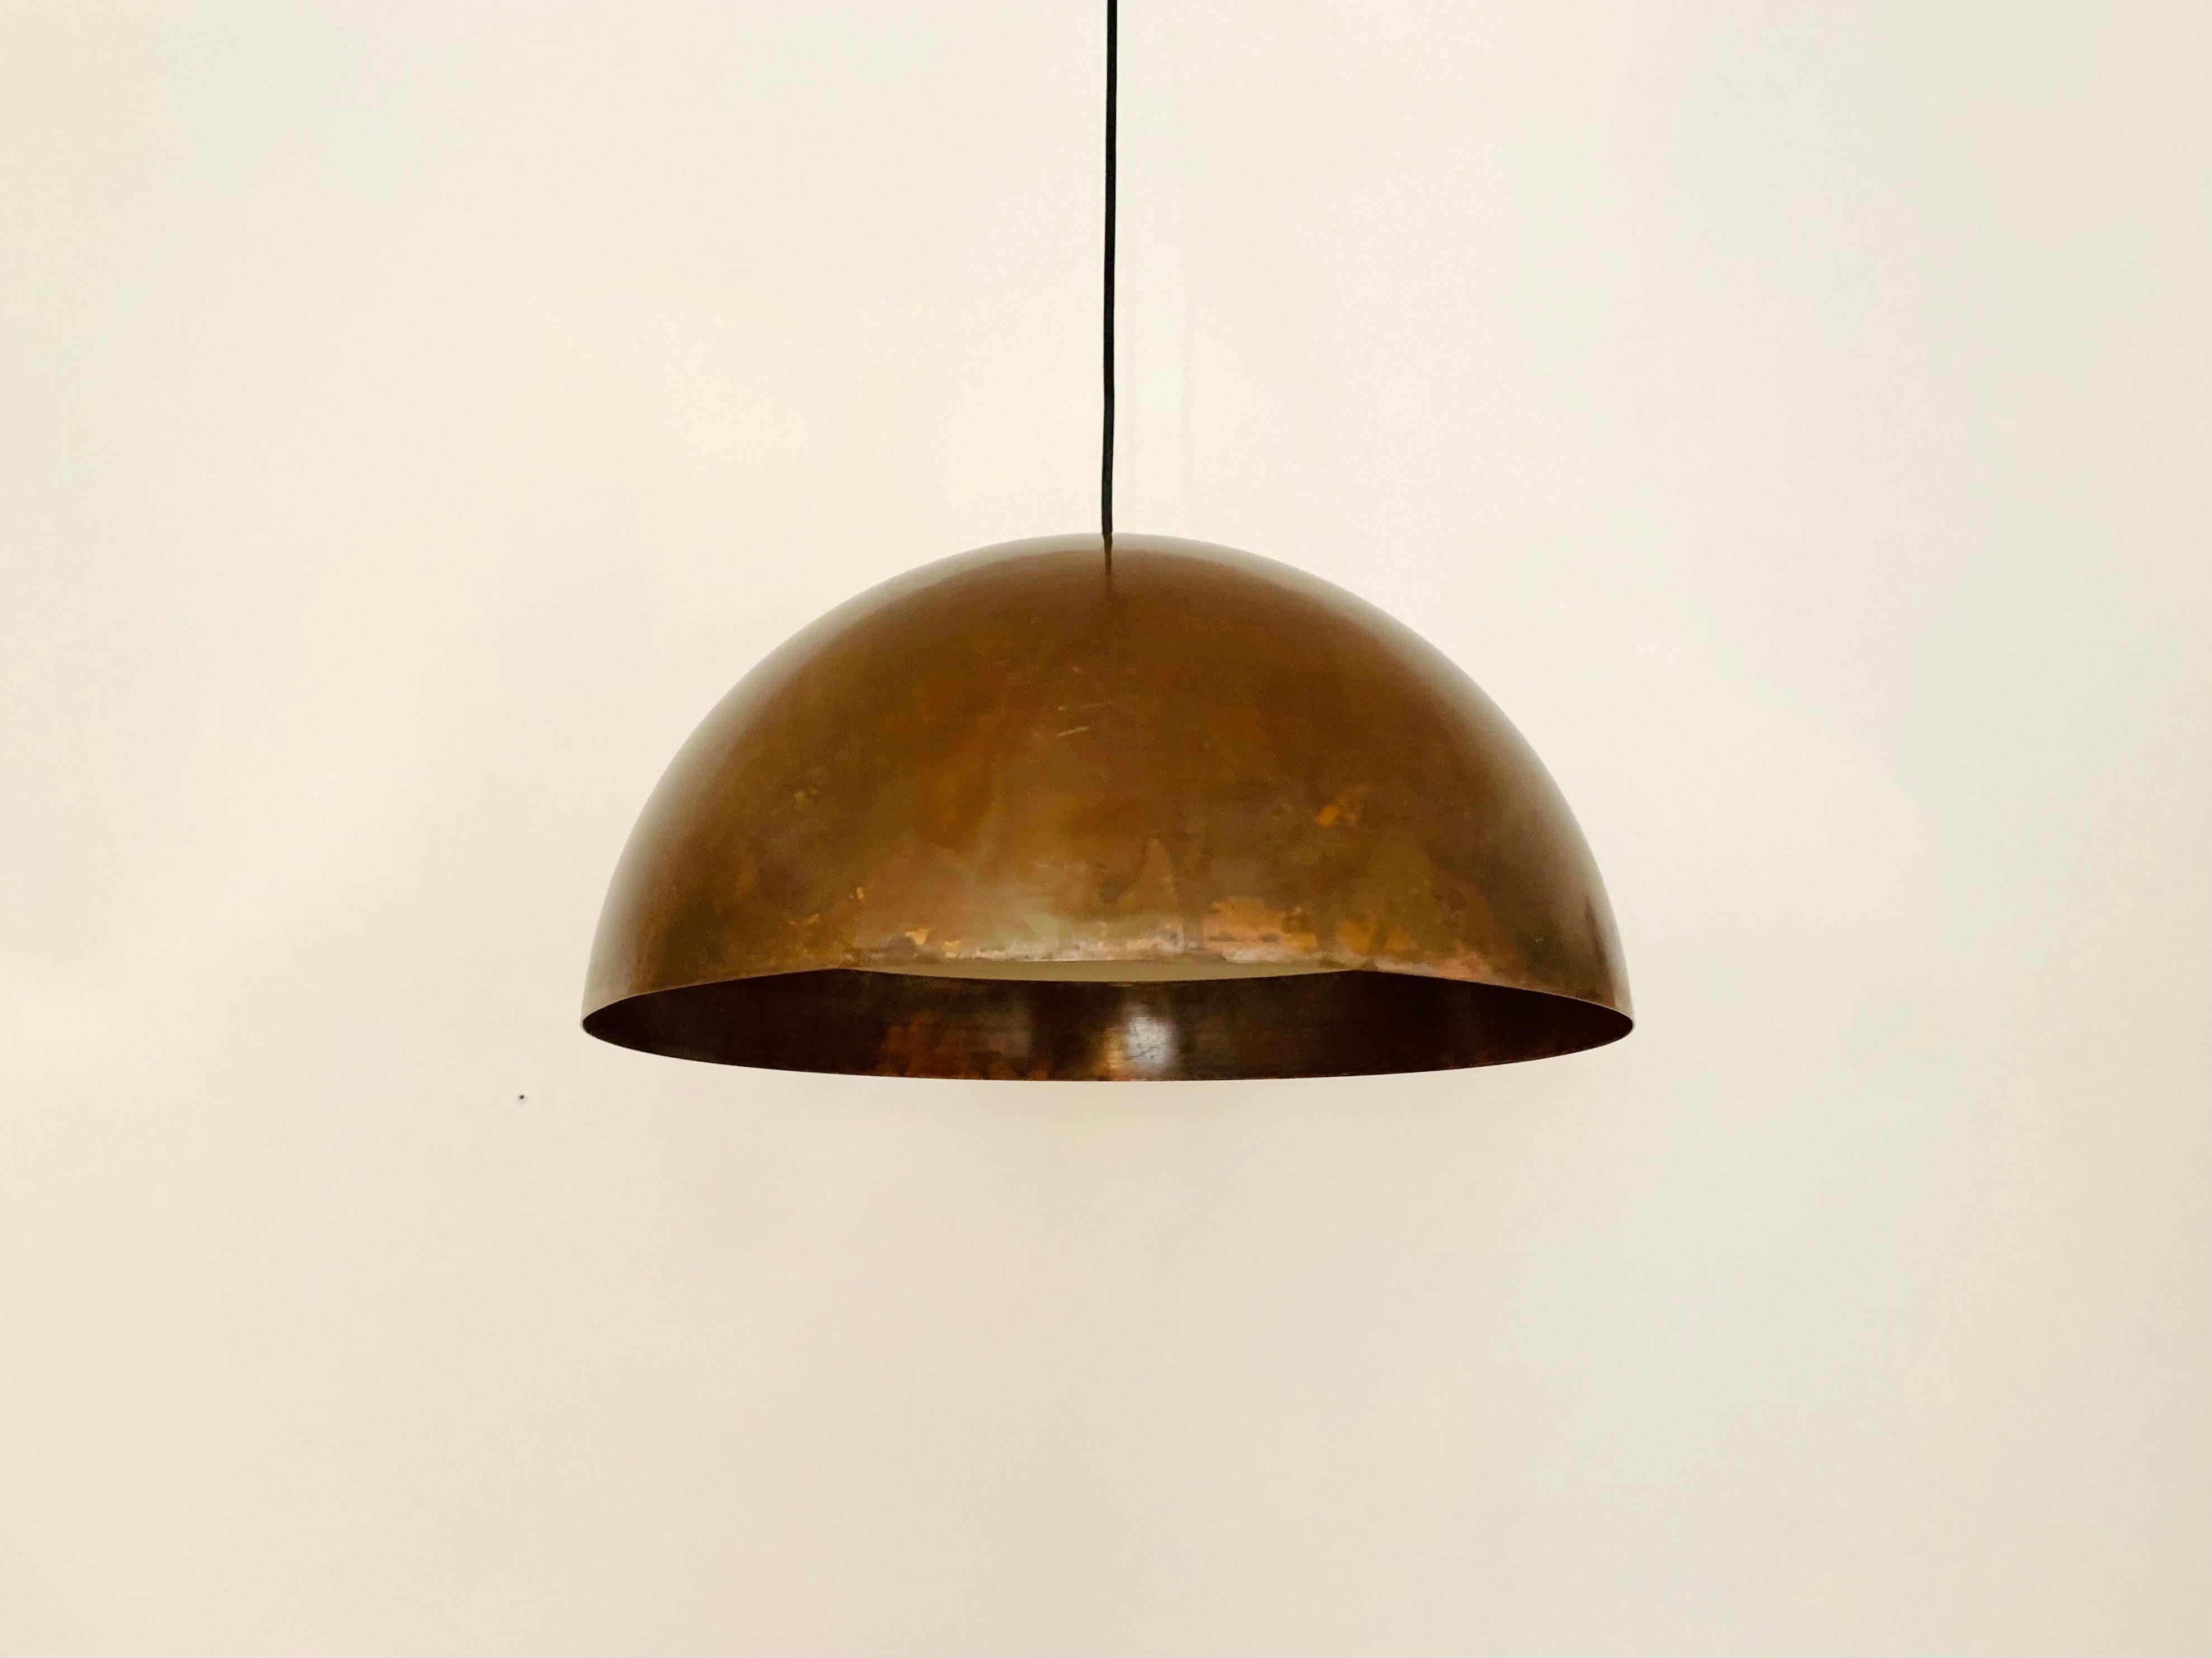 Extremely beautifully patinated copper pendant lamp from the 1960s.
High quality workmanship and extremely beautiful design.
An enrichment for every home and a unique piece.
A cozy lighting mood arises.

Manufacturer: Beisl

Condition:

Very good